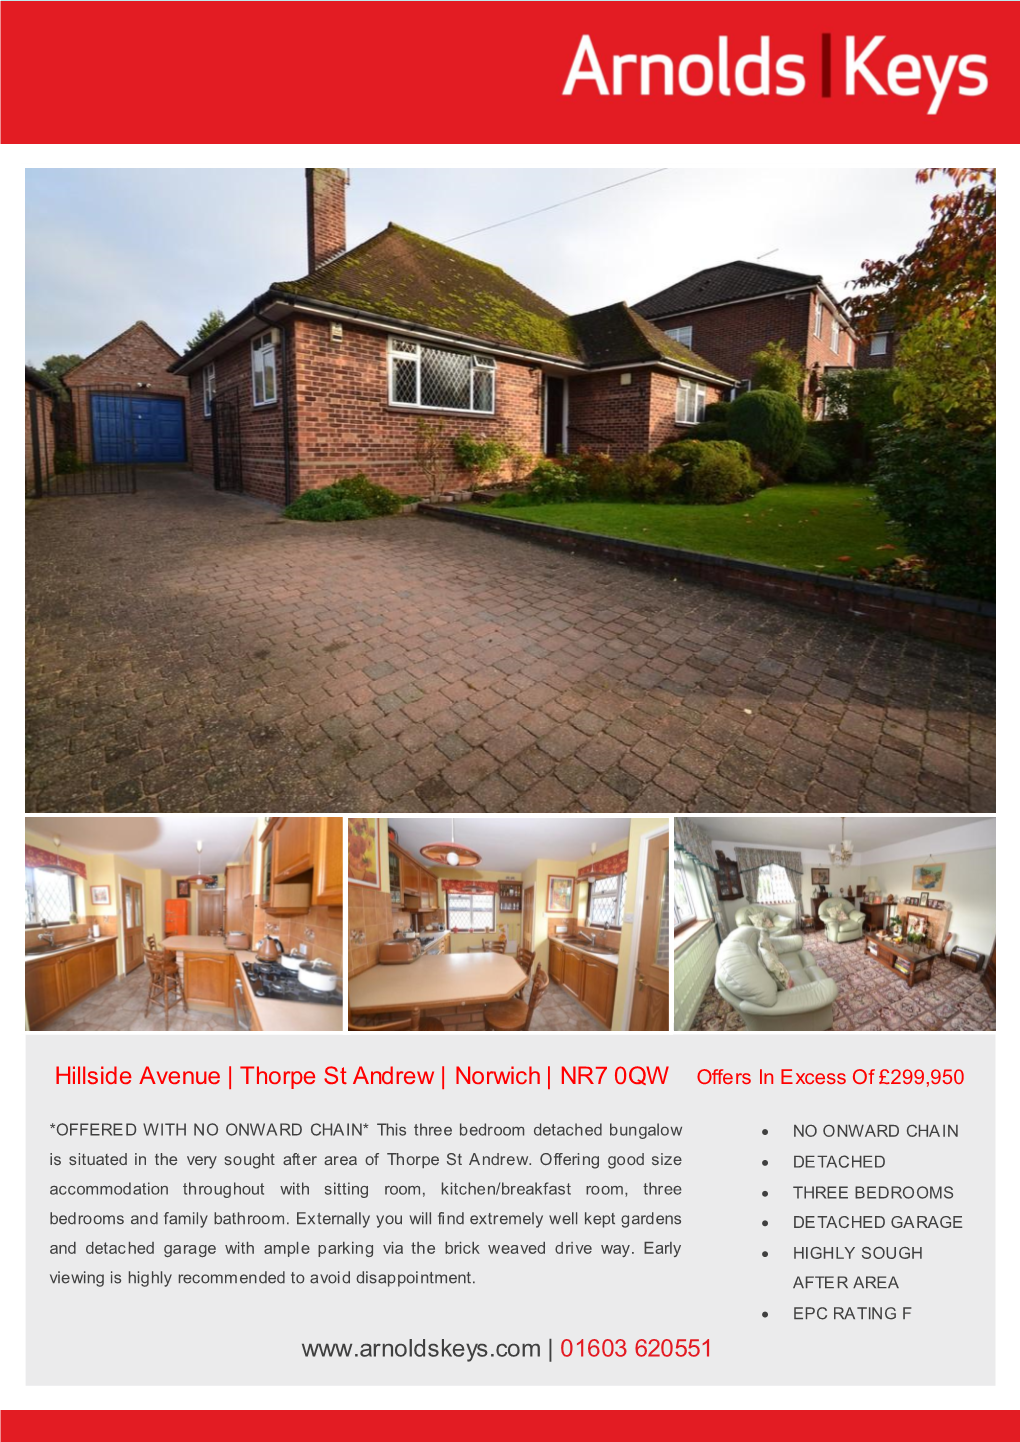 Thorpe St Andrew | Norwich | NR7 0QW Offers in Excess of £299,950